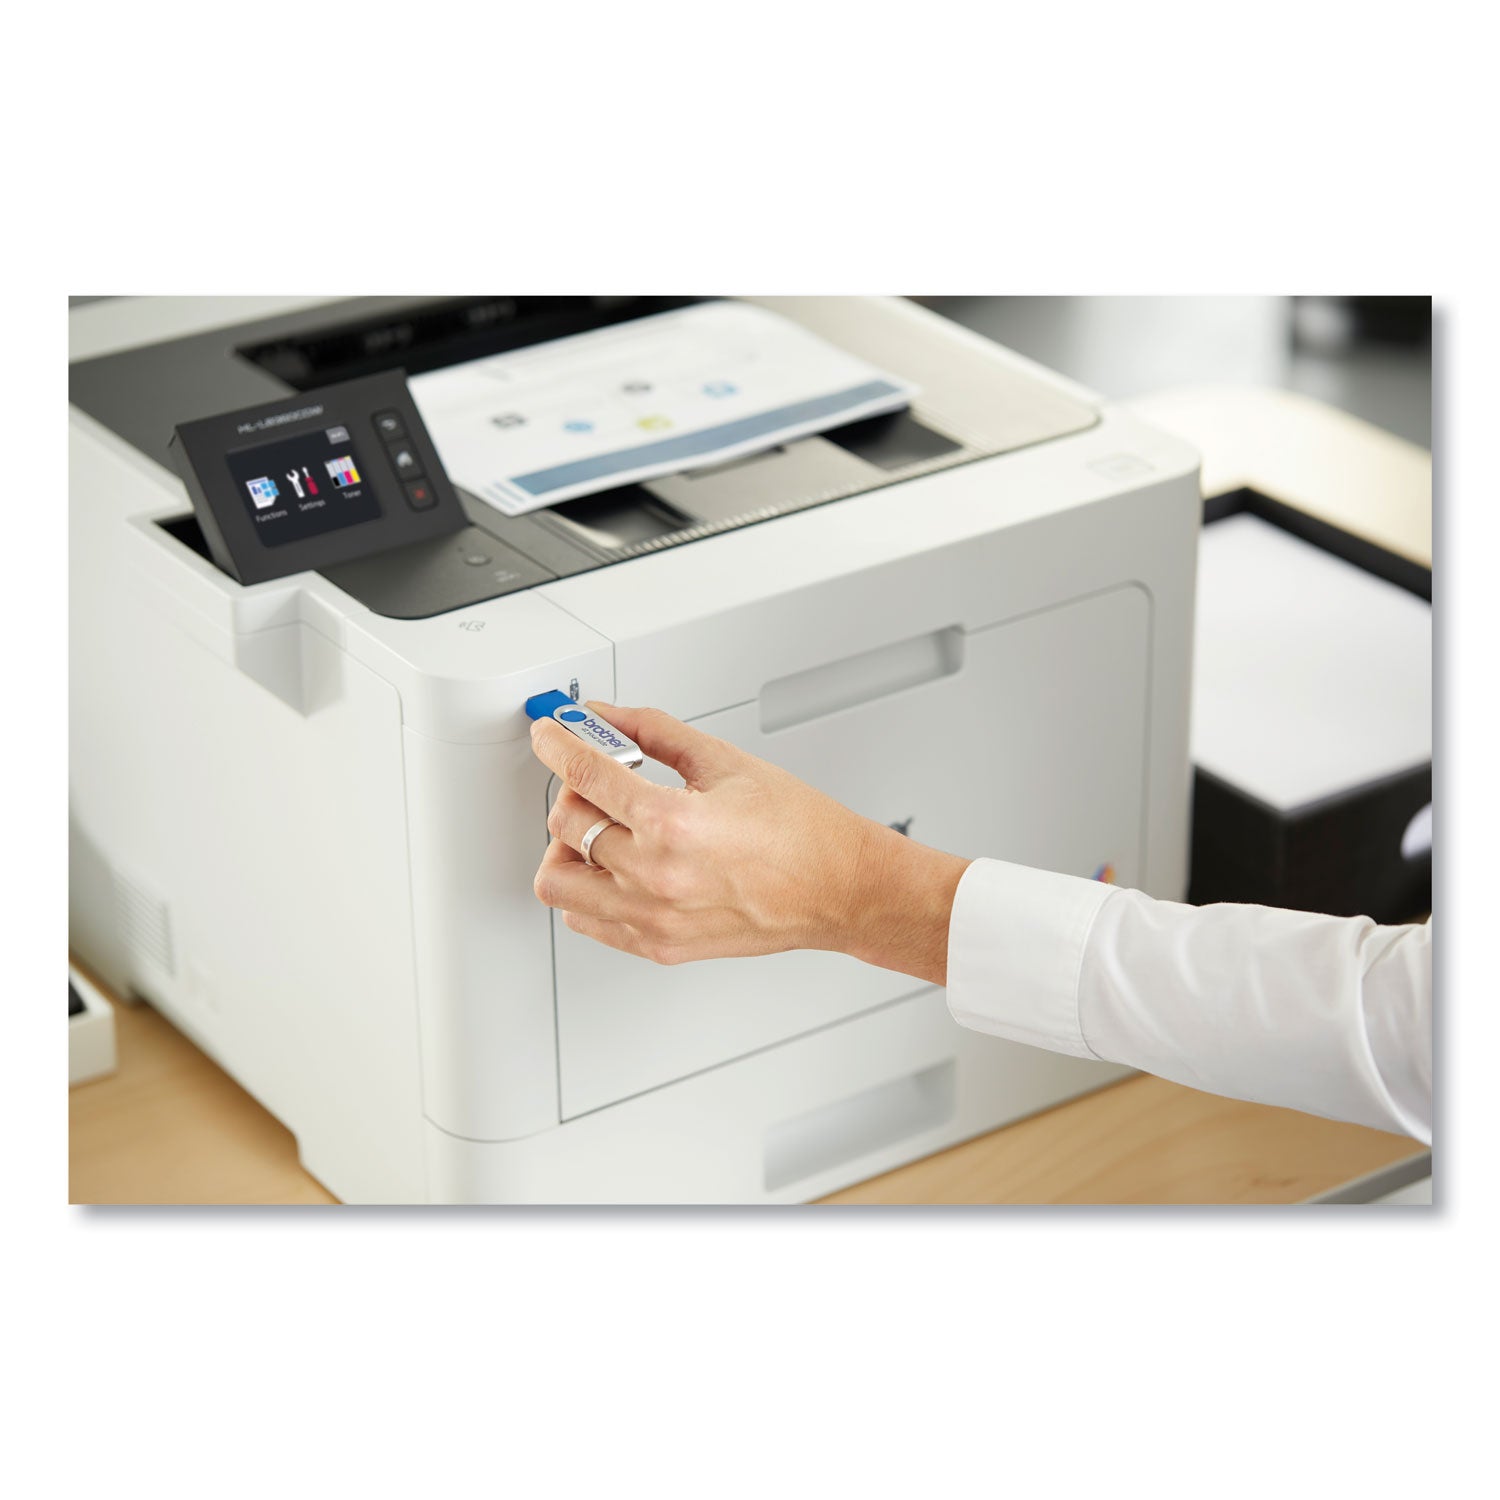 hll8360cdw-business-color-laser-printer-with-duplex-printing-and-wireless-networking_brthll8360cdw - 5